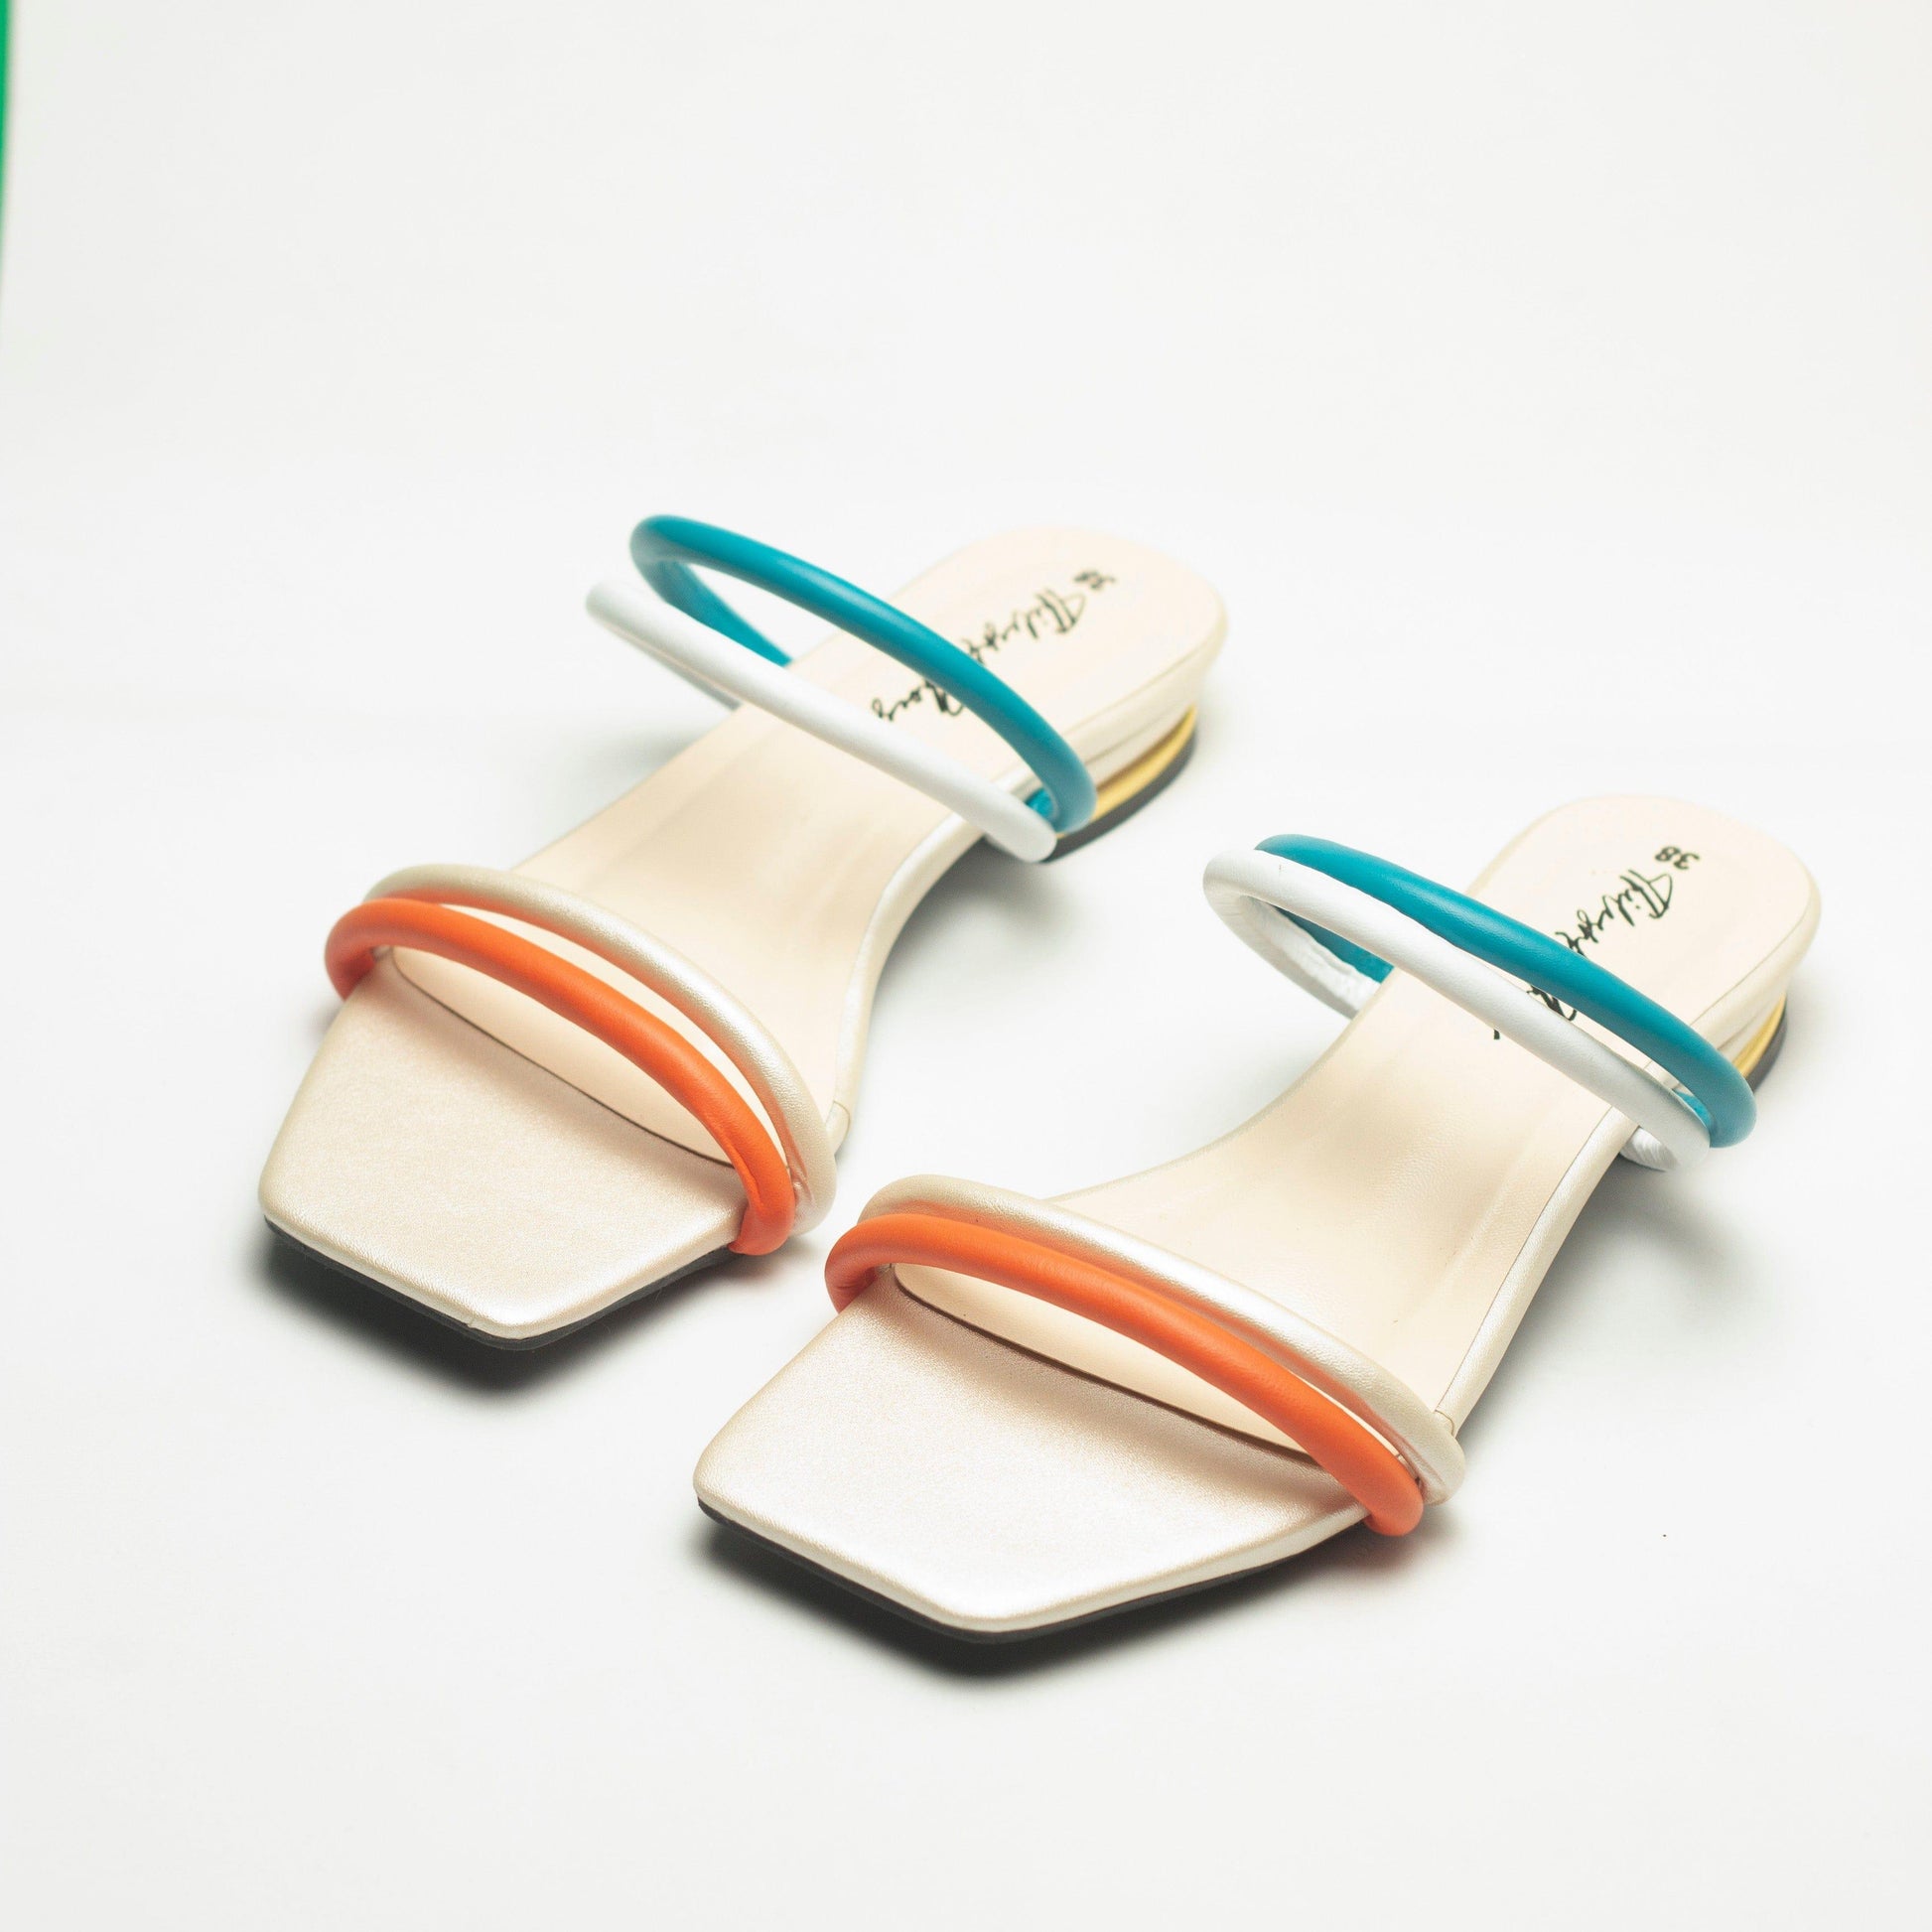 Nawabi Shoes BD Shoes 35 / antiquewhite Flat Sandals for Women: A Wide Range of Styles and Colors Available